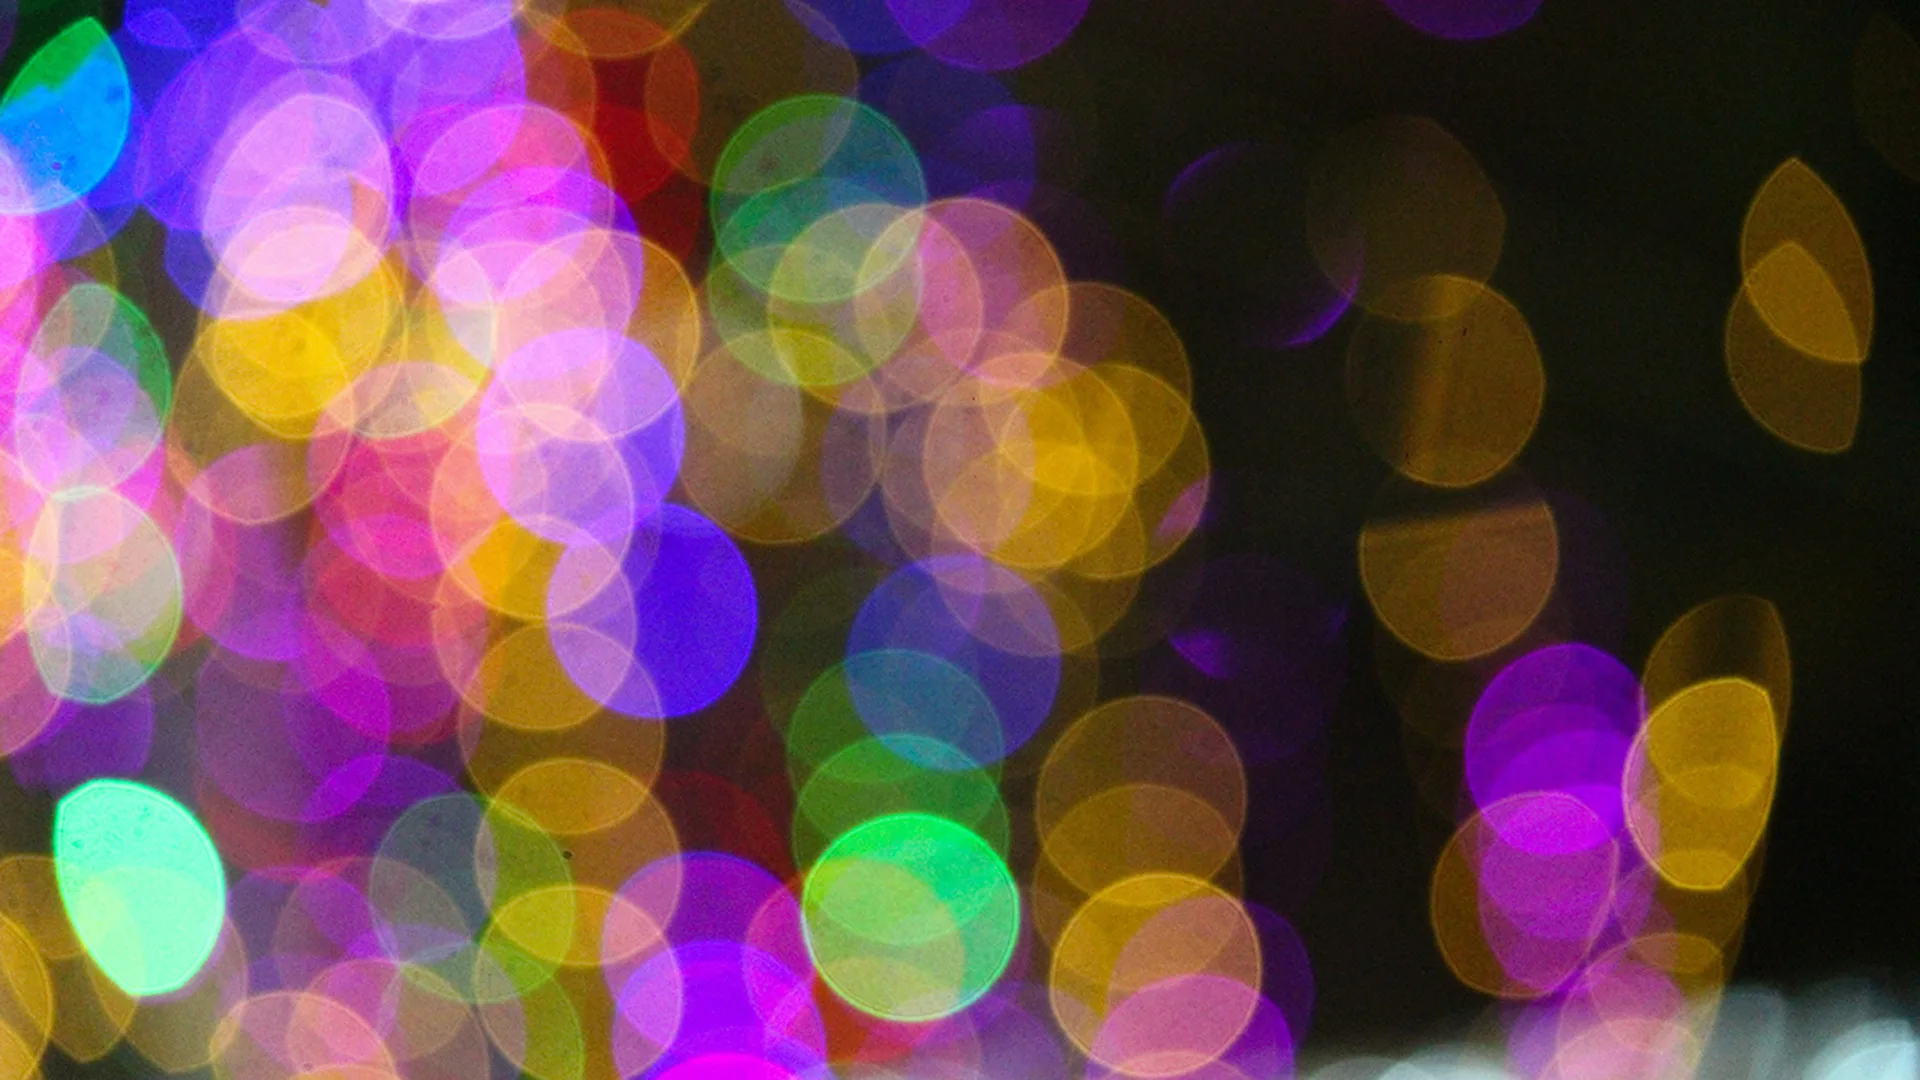 Circles of colourful lights